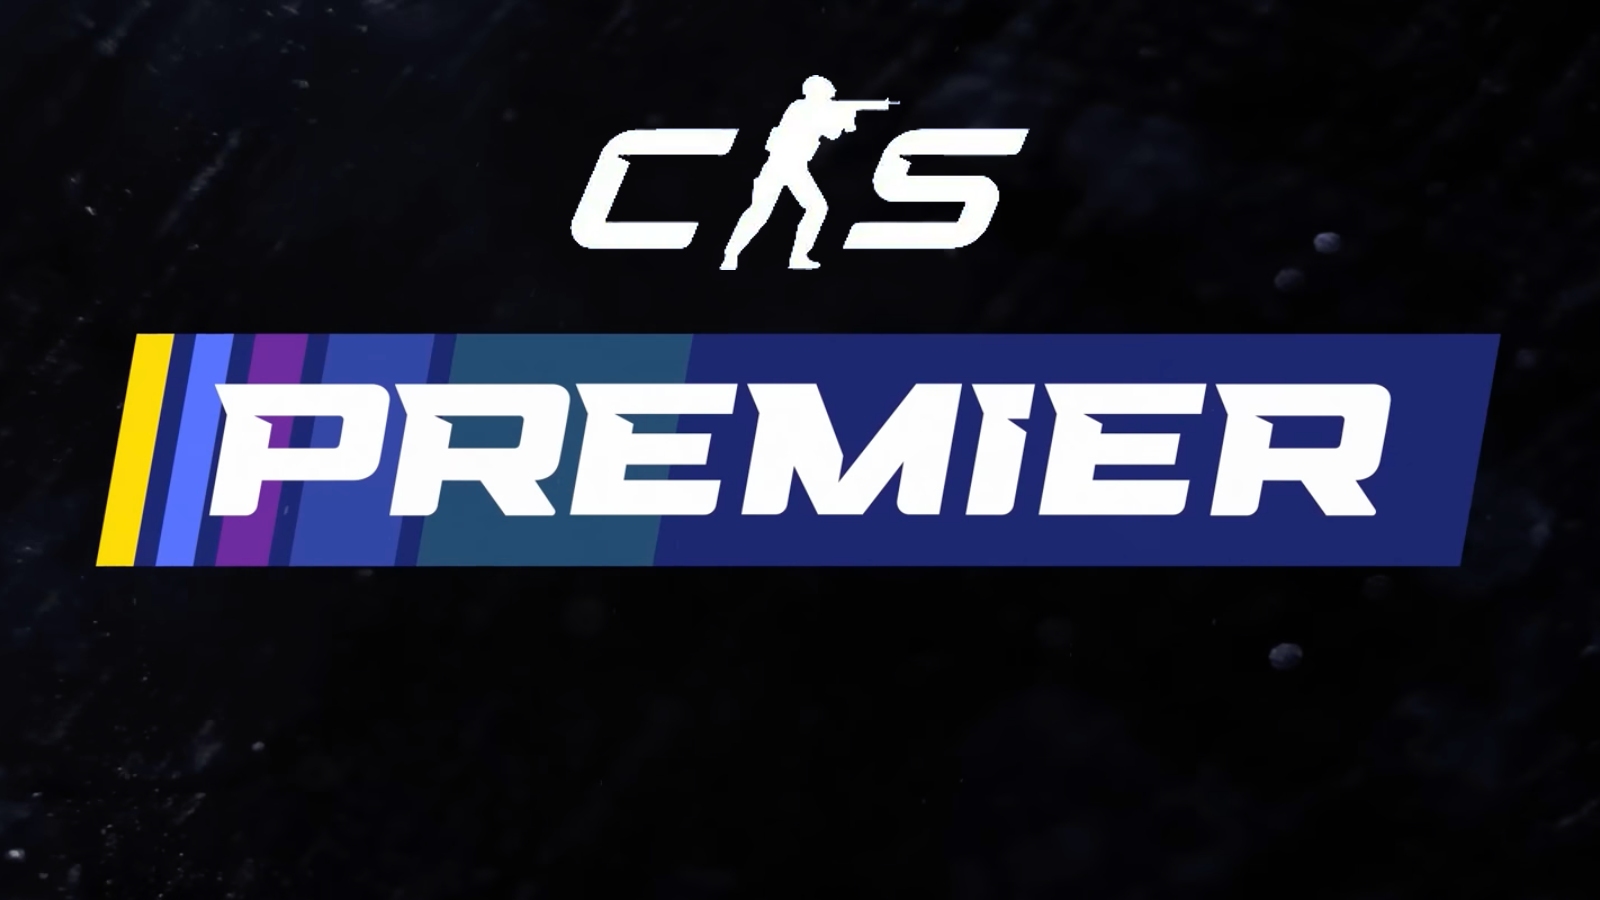 Counter-Strike 2 (CS2): Premier mode matches and leaderboards